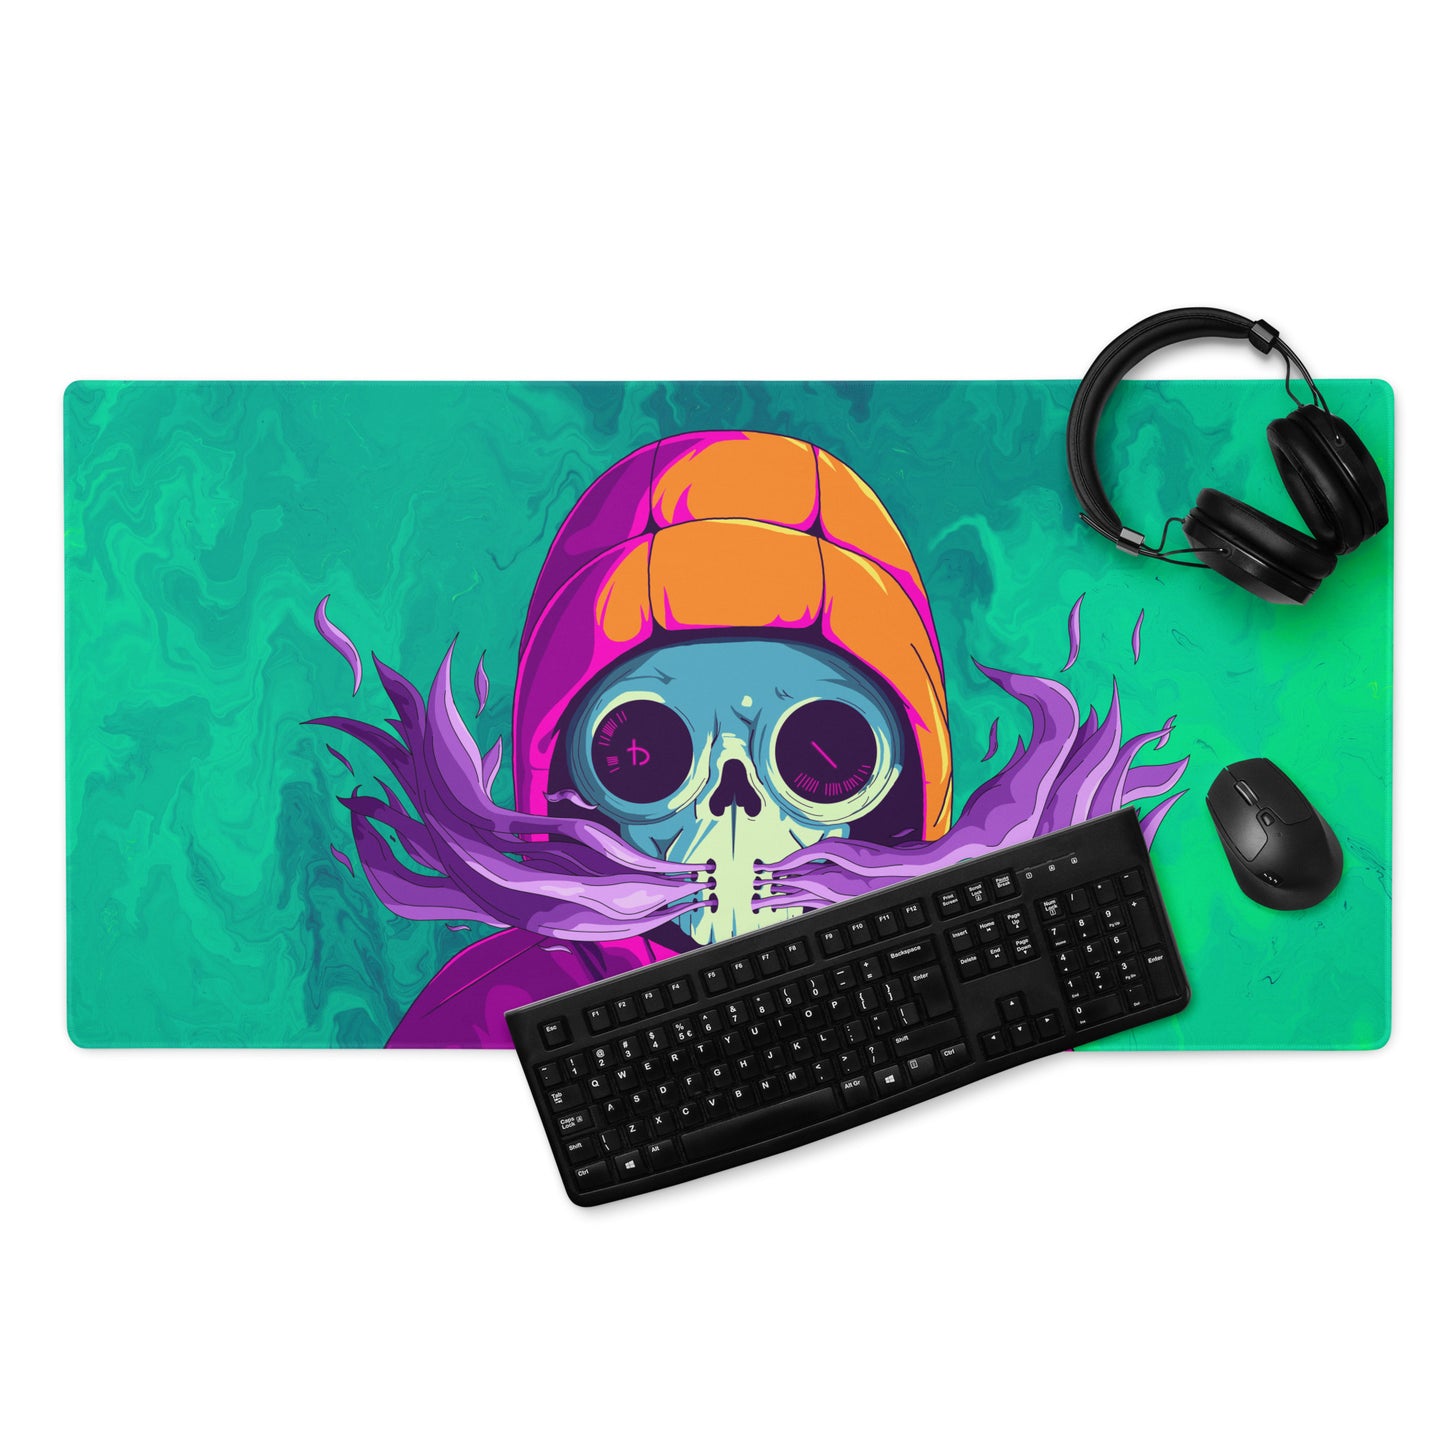 A 36" x 18" desk pad with a man wearing a skull gas mask breathing smoke out from it displayed with a keyboard, headphones and a mouse. Green in color.